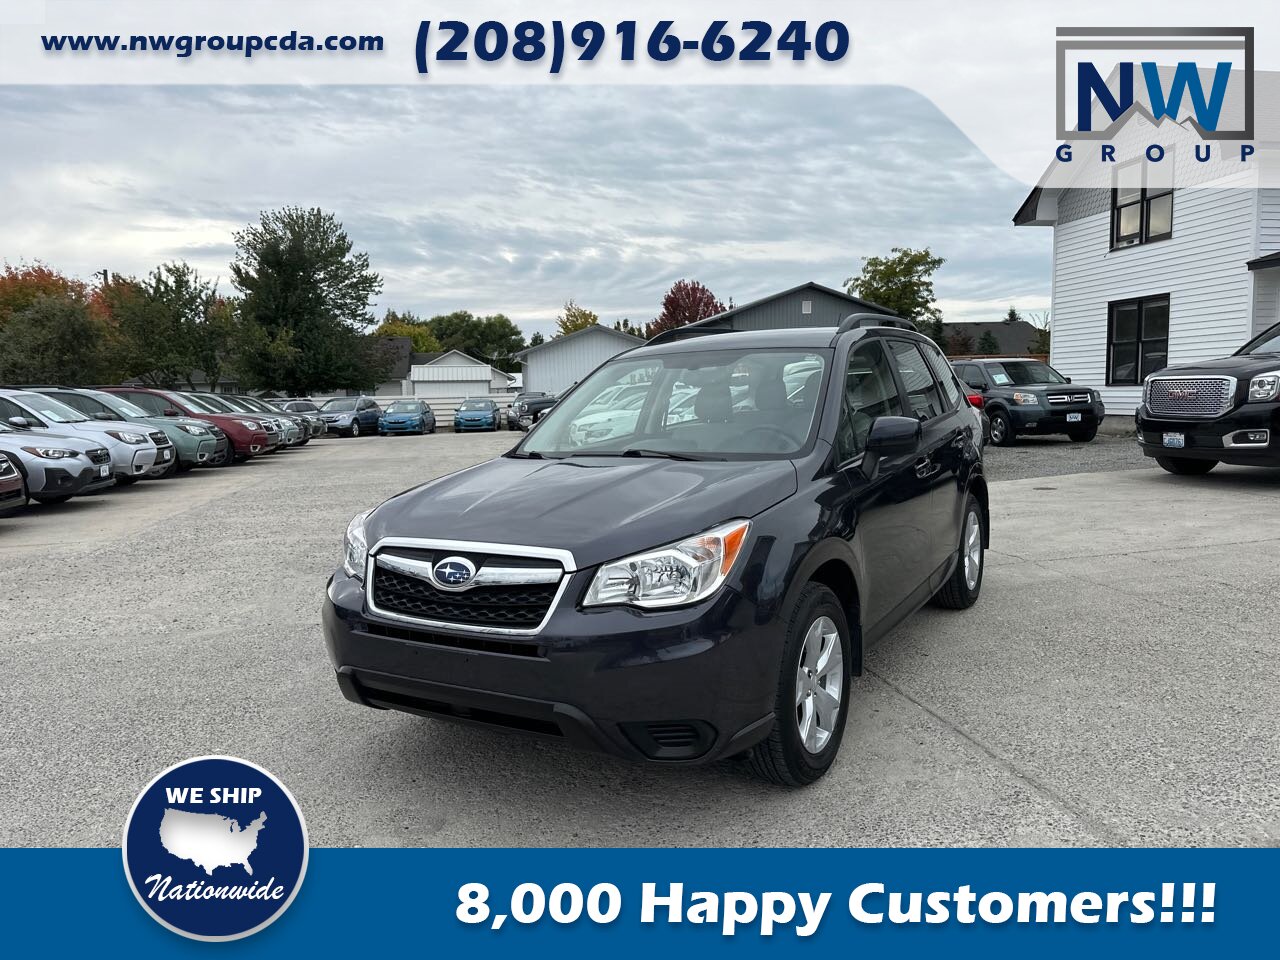 2015 Subaru Forester 2.5i, Low Miles, 45k  AWD, Alloy Wheels, Nice Color Combination! - Photo 3 - Post Falls, ID 83854